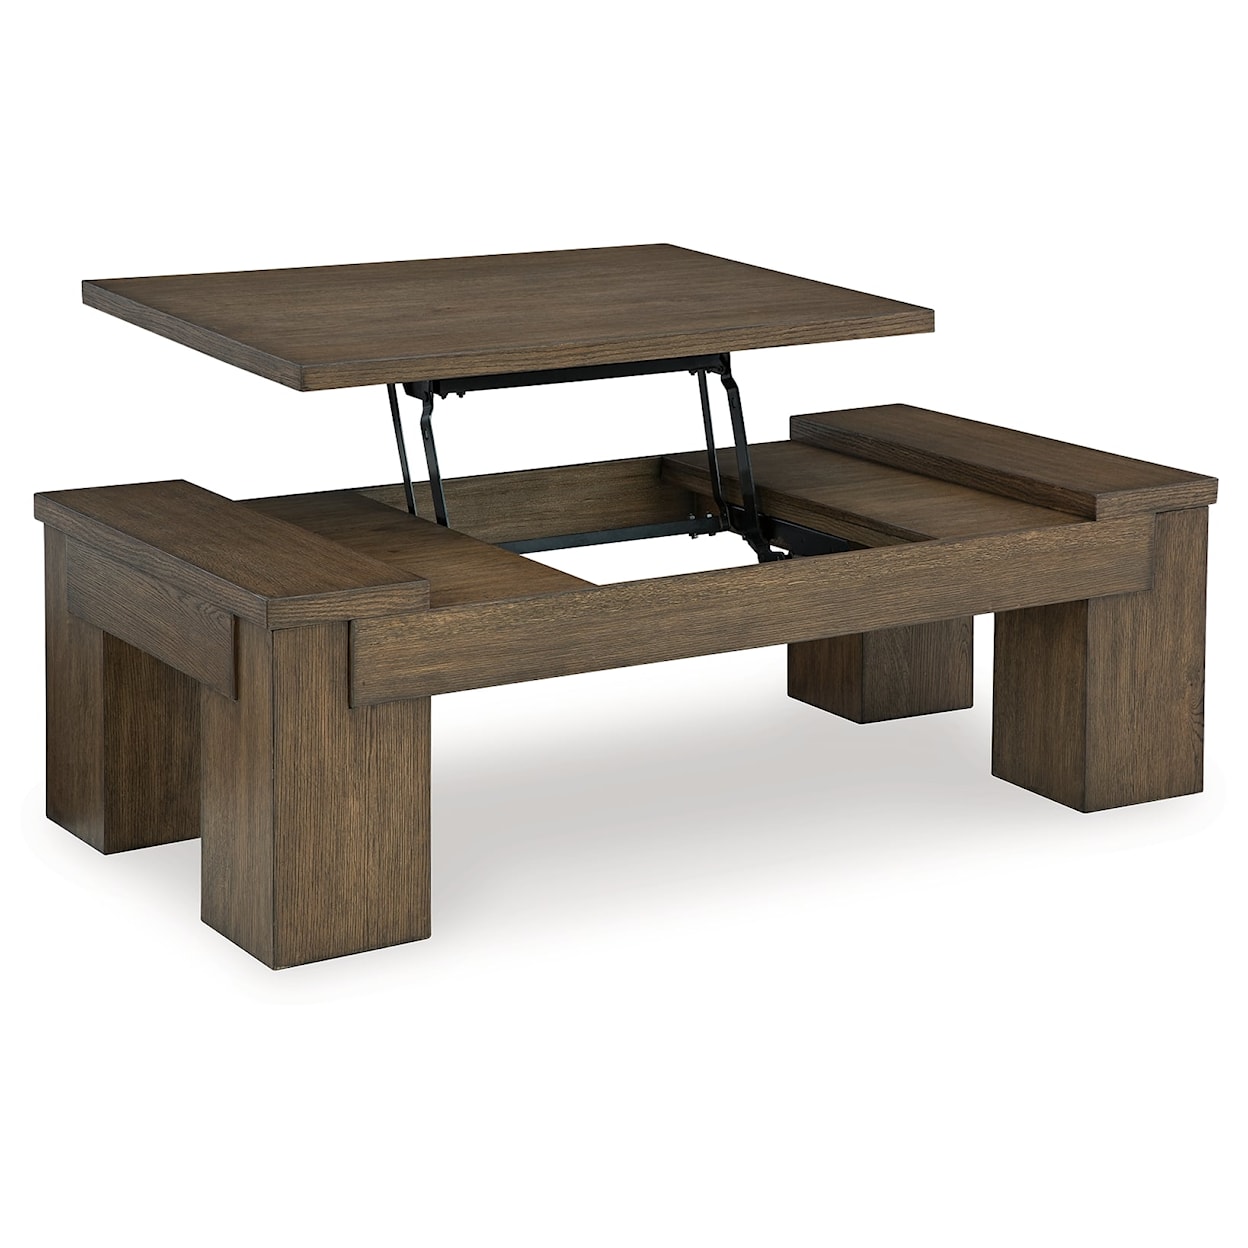 Benchcraft Rosswain Lift-Top Coffee Table